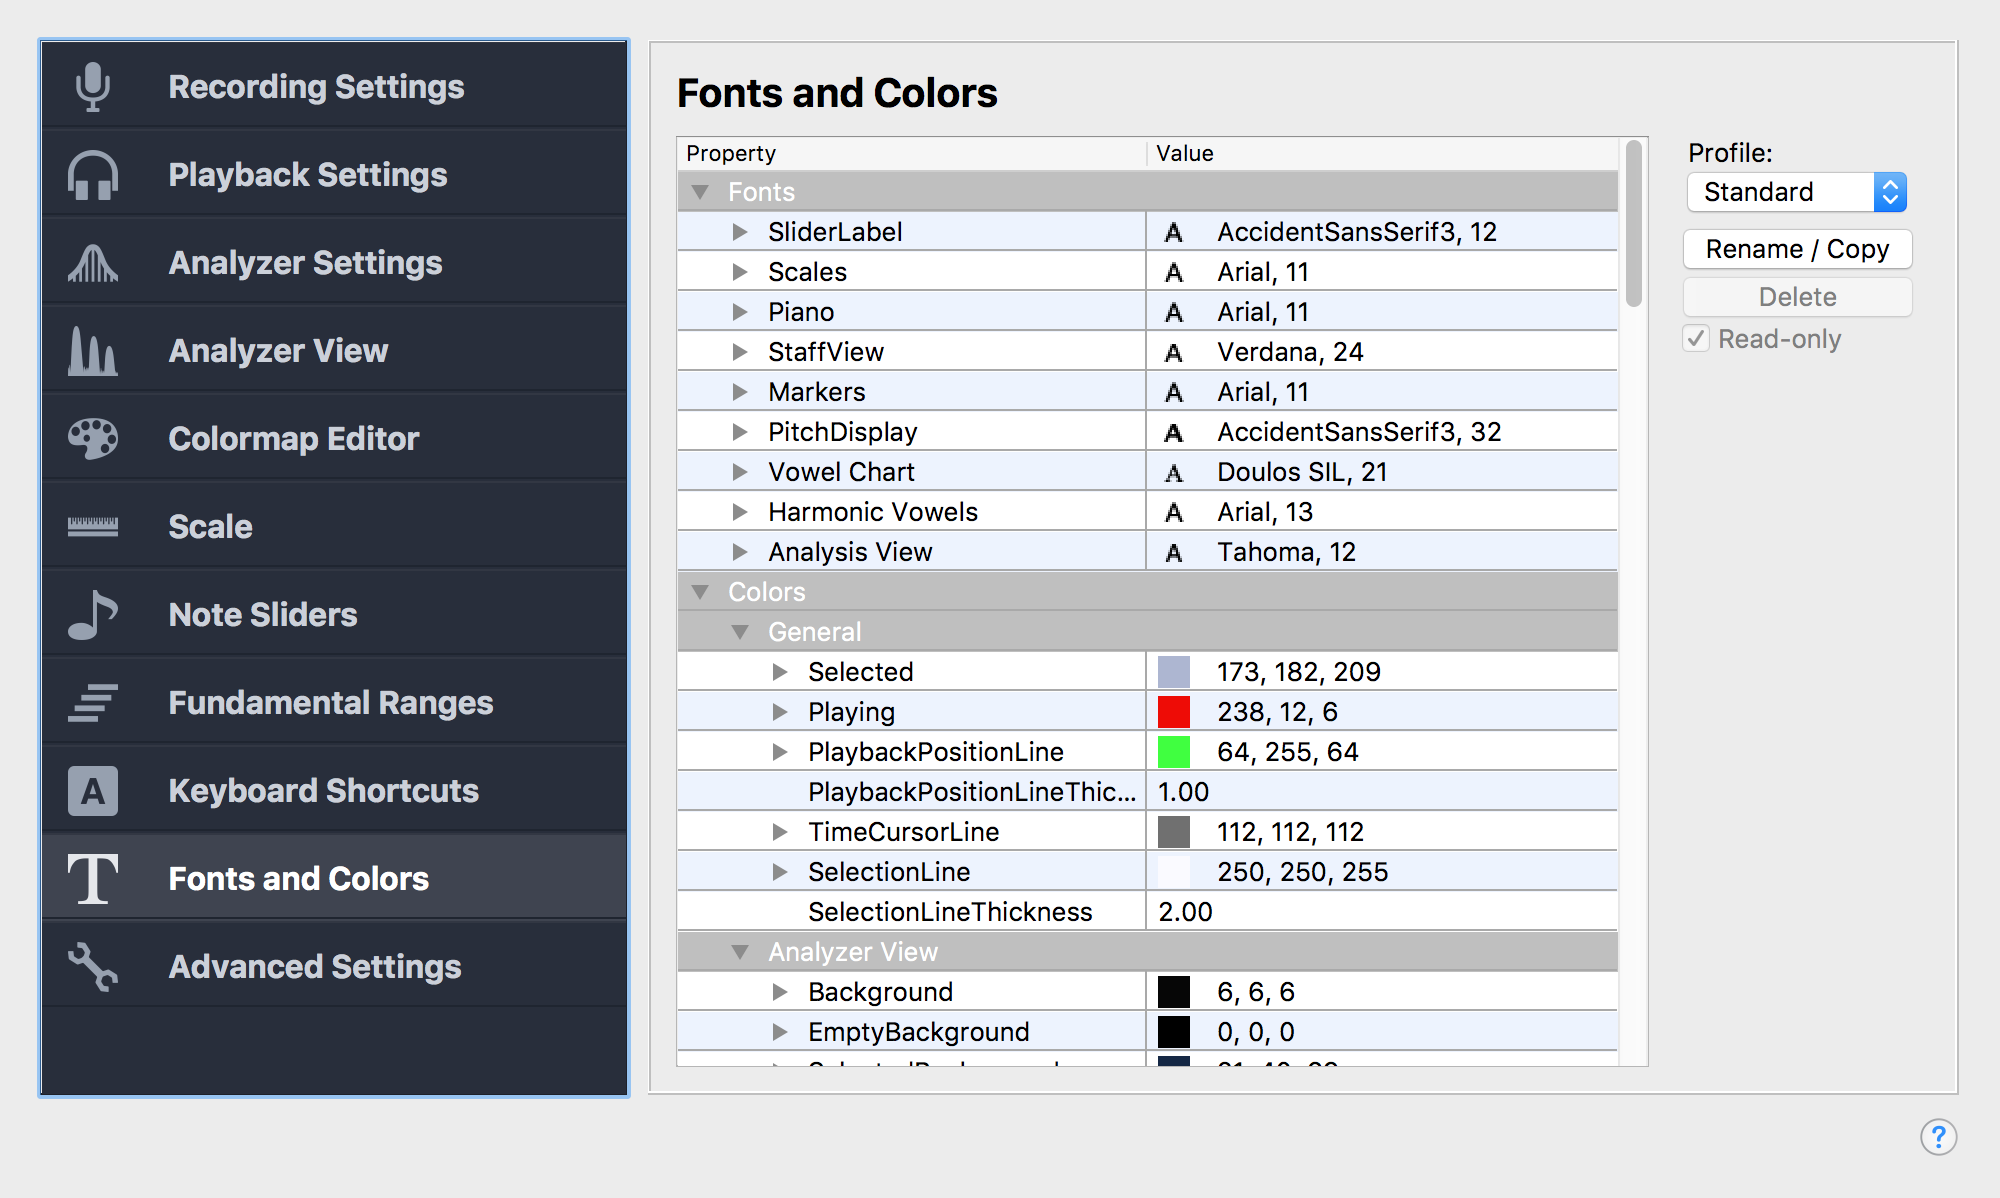 Fonts and Colors settings